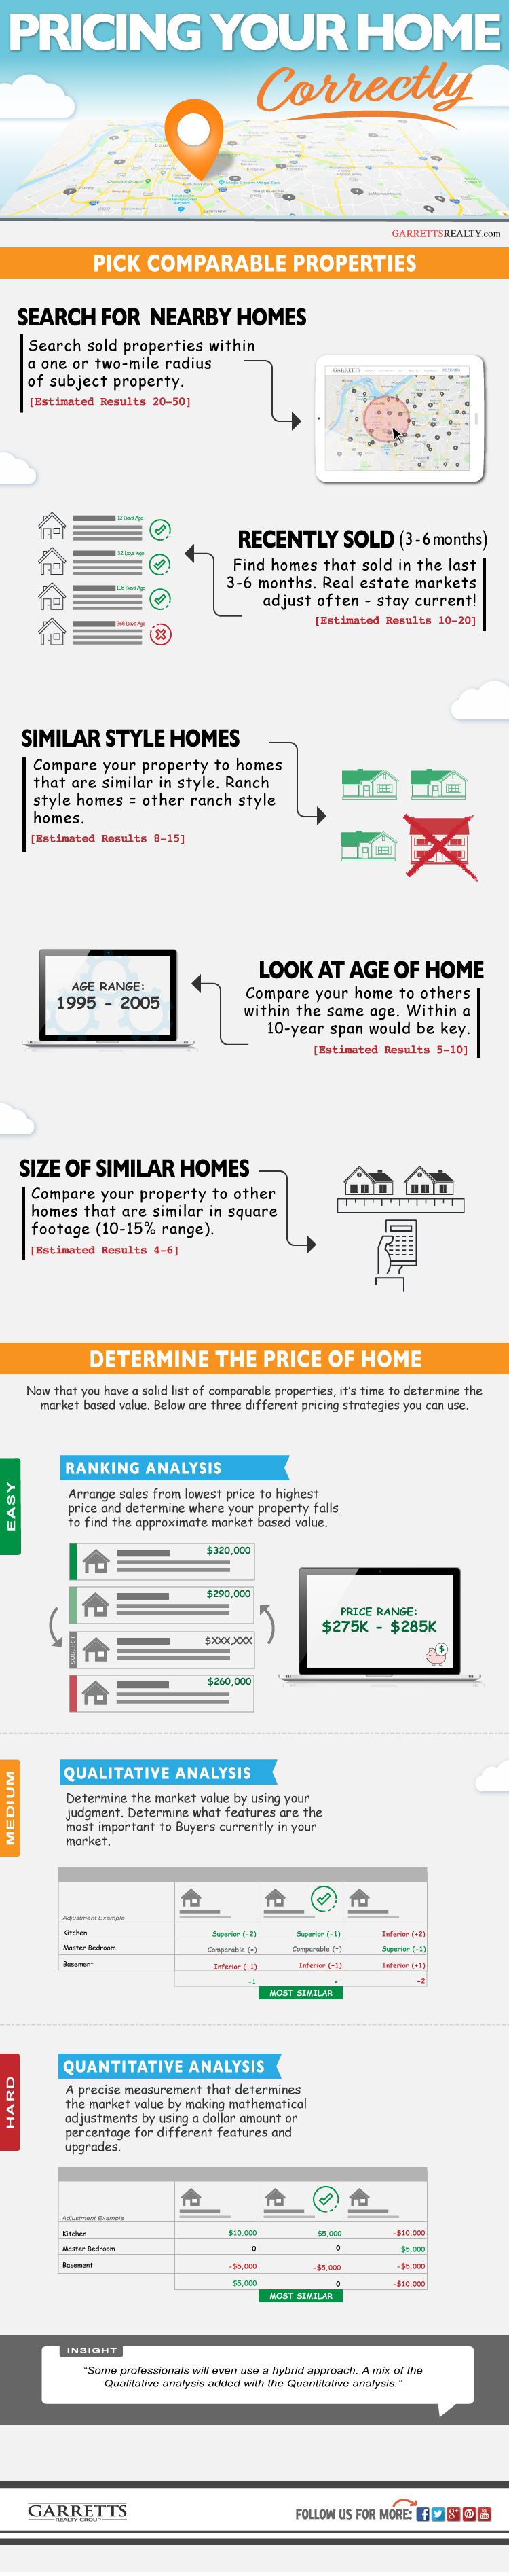 Step by step guide to pricing a home - Infographic